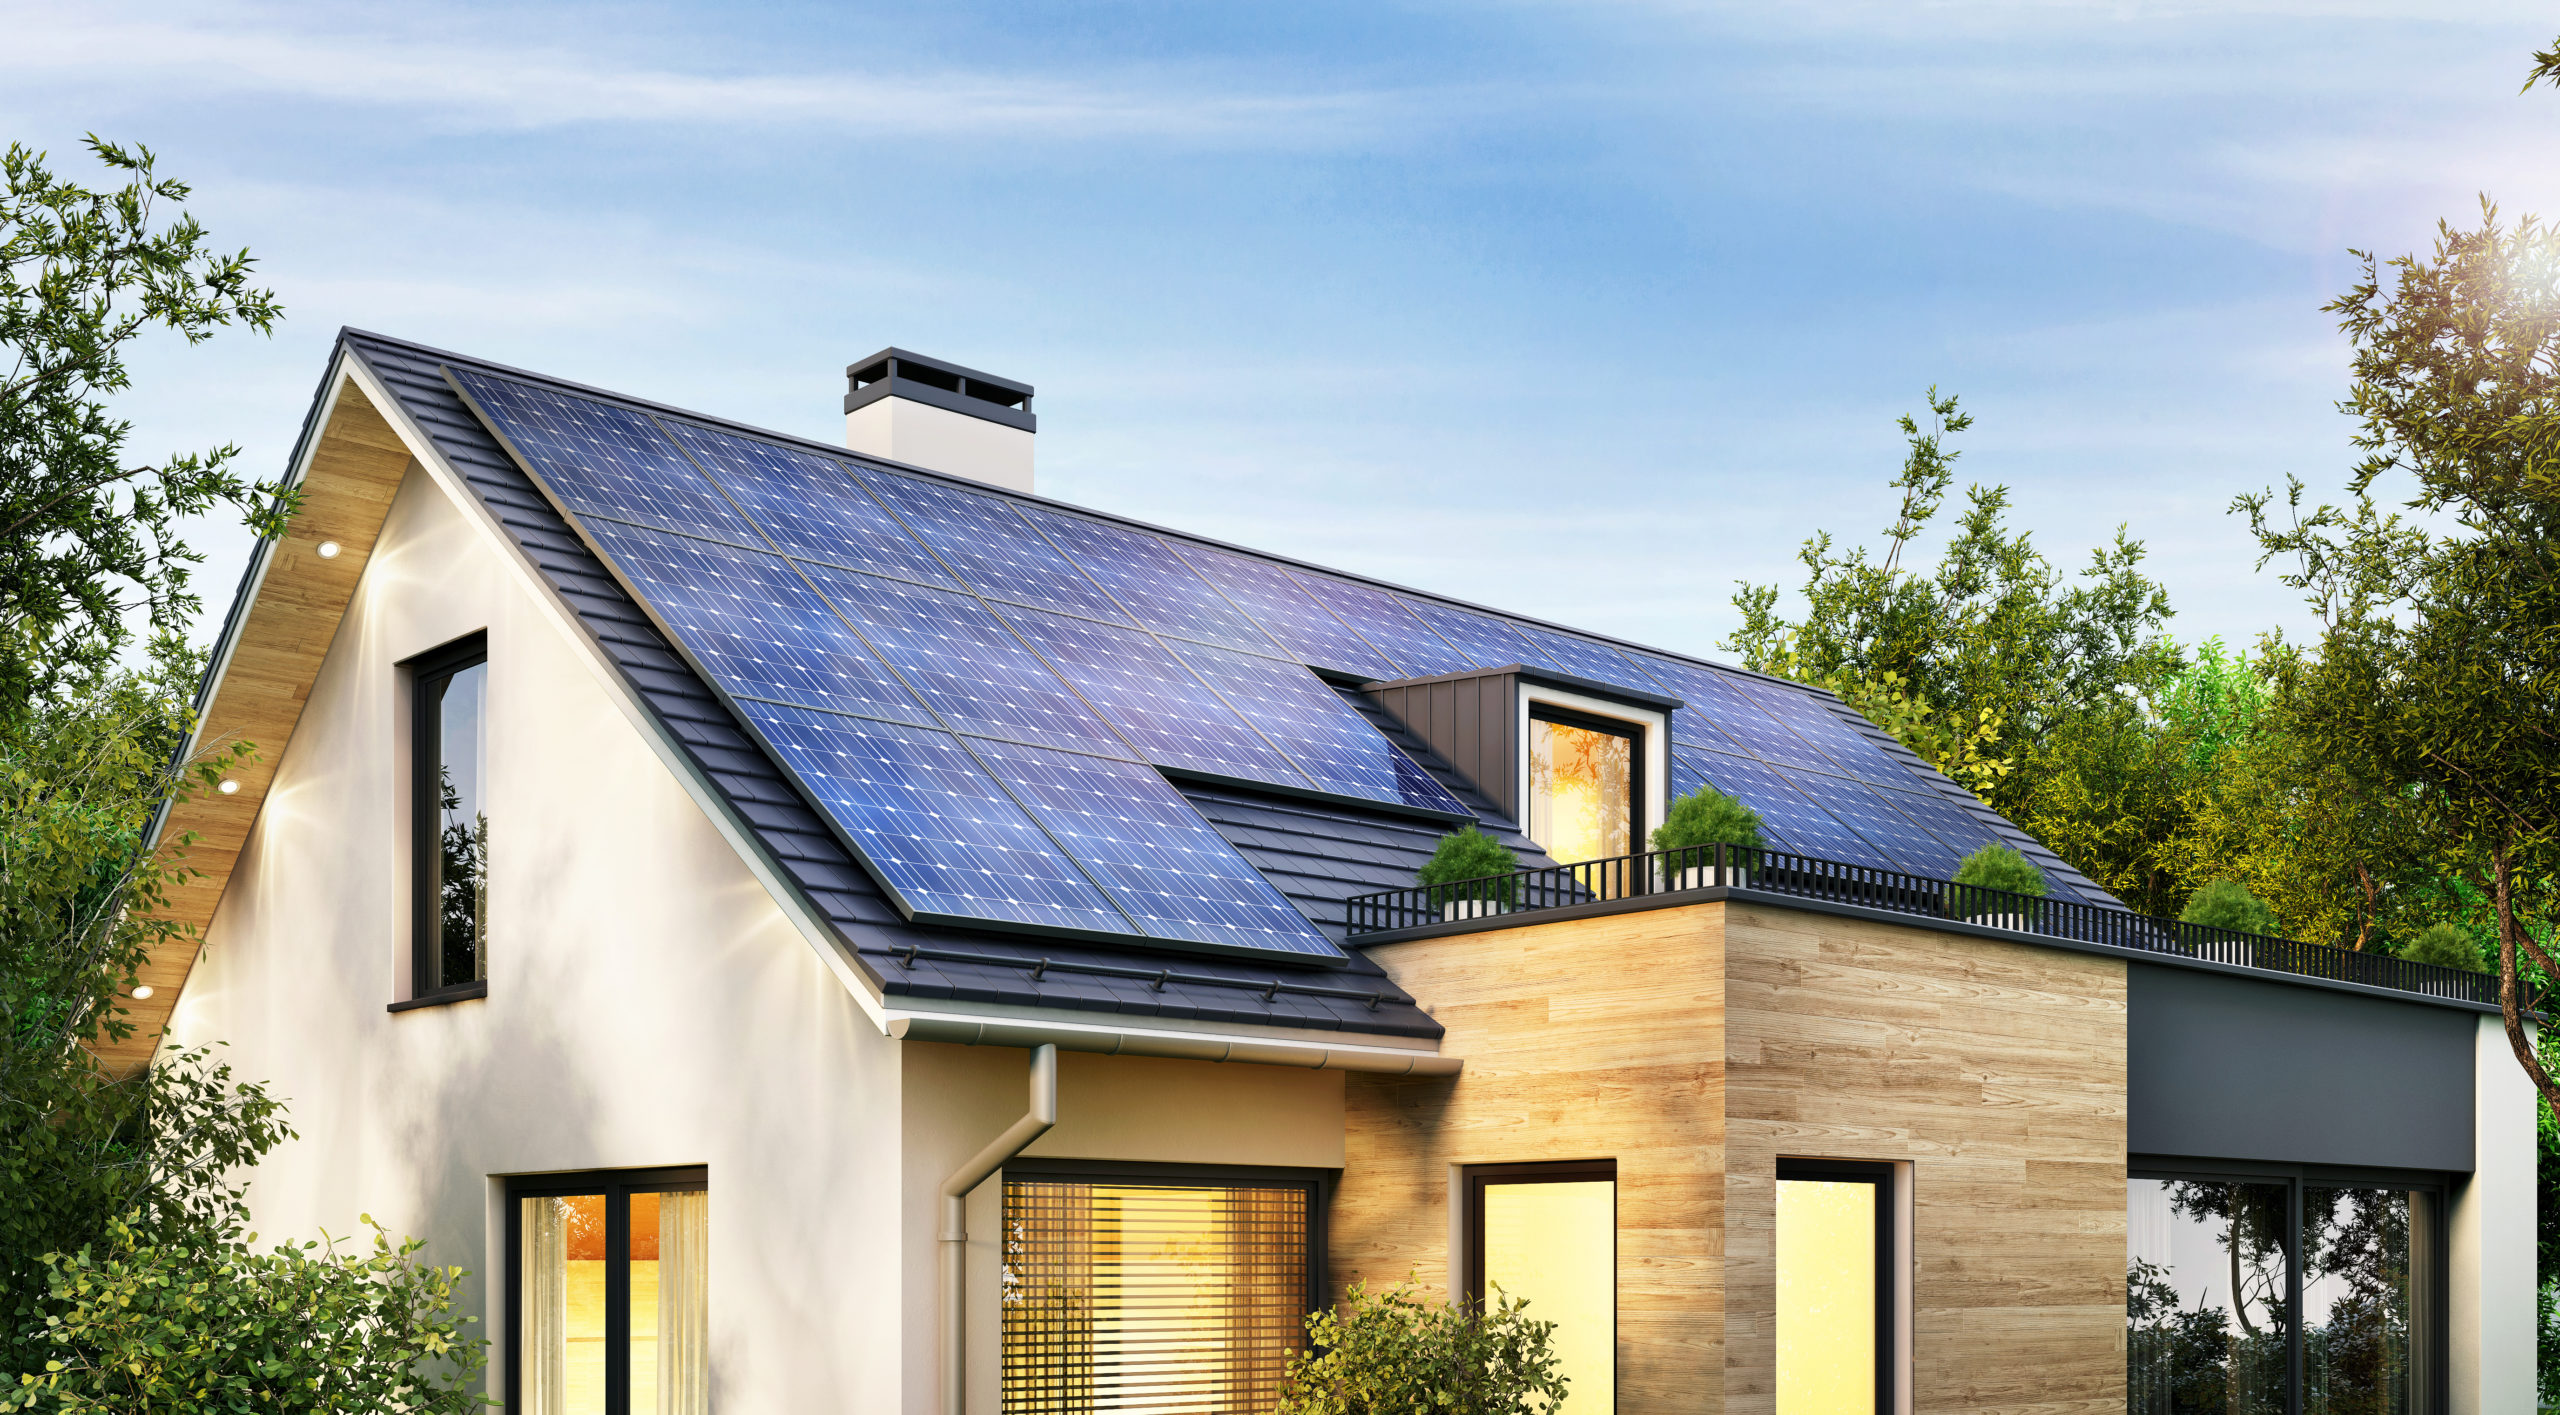 Solar panels on the gable roof of a modern house